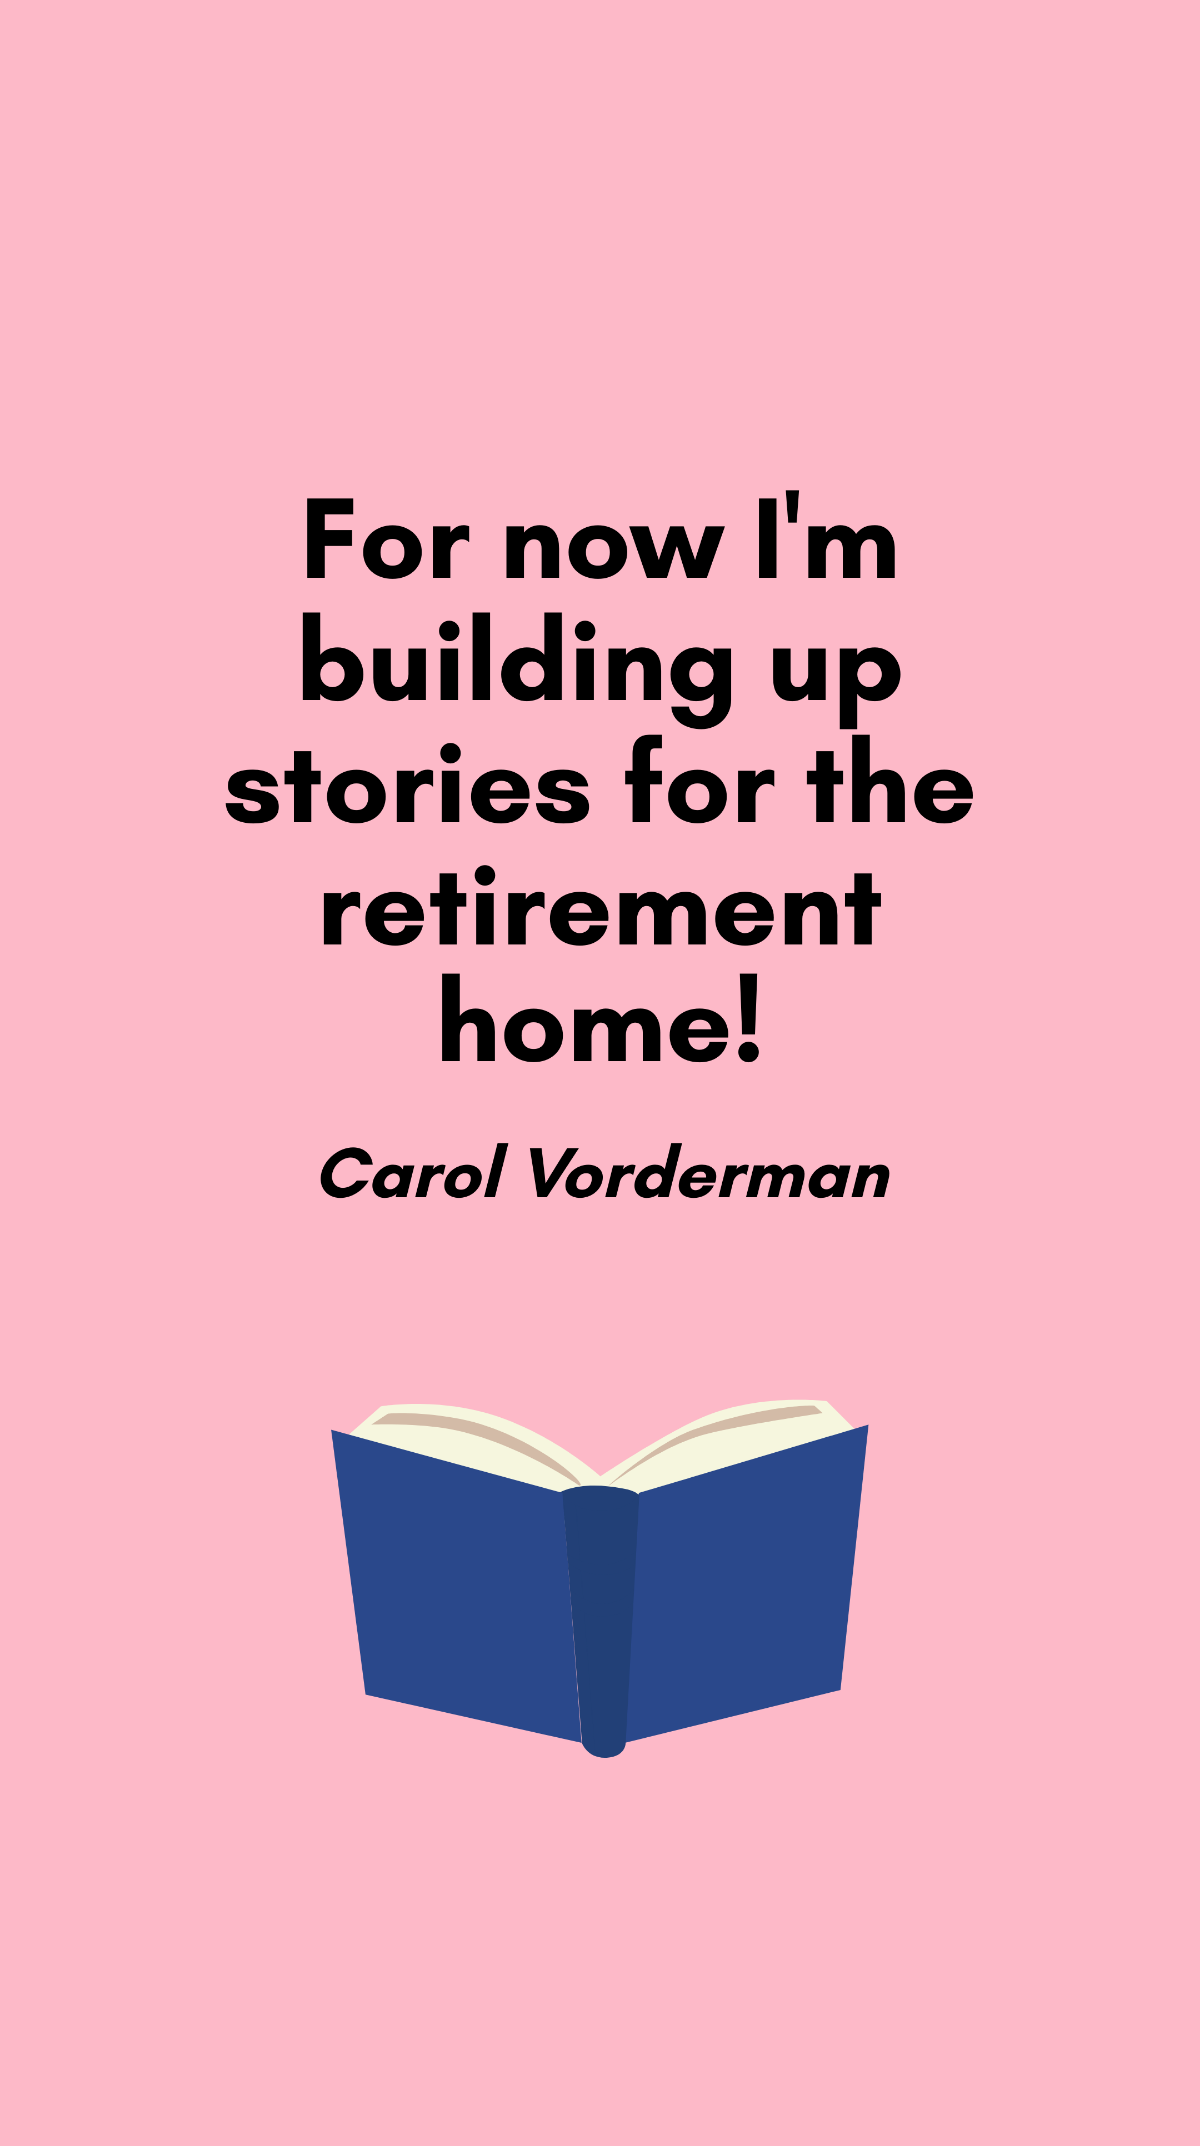 Carol Vorderman - For now I'm building up stories for the retirement home! Template